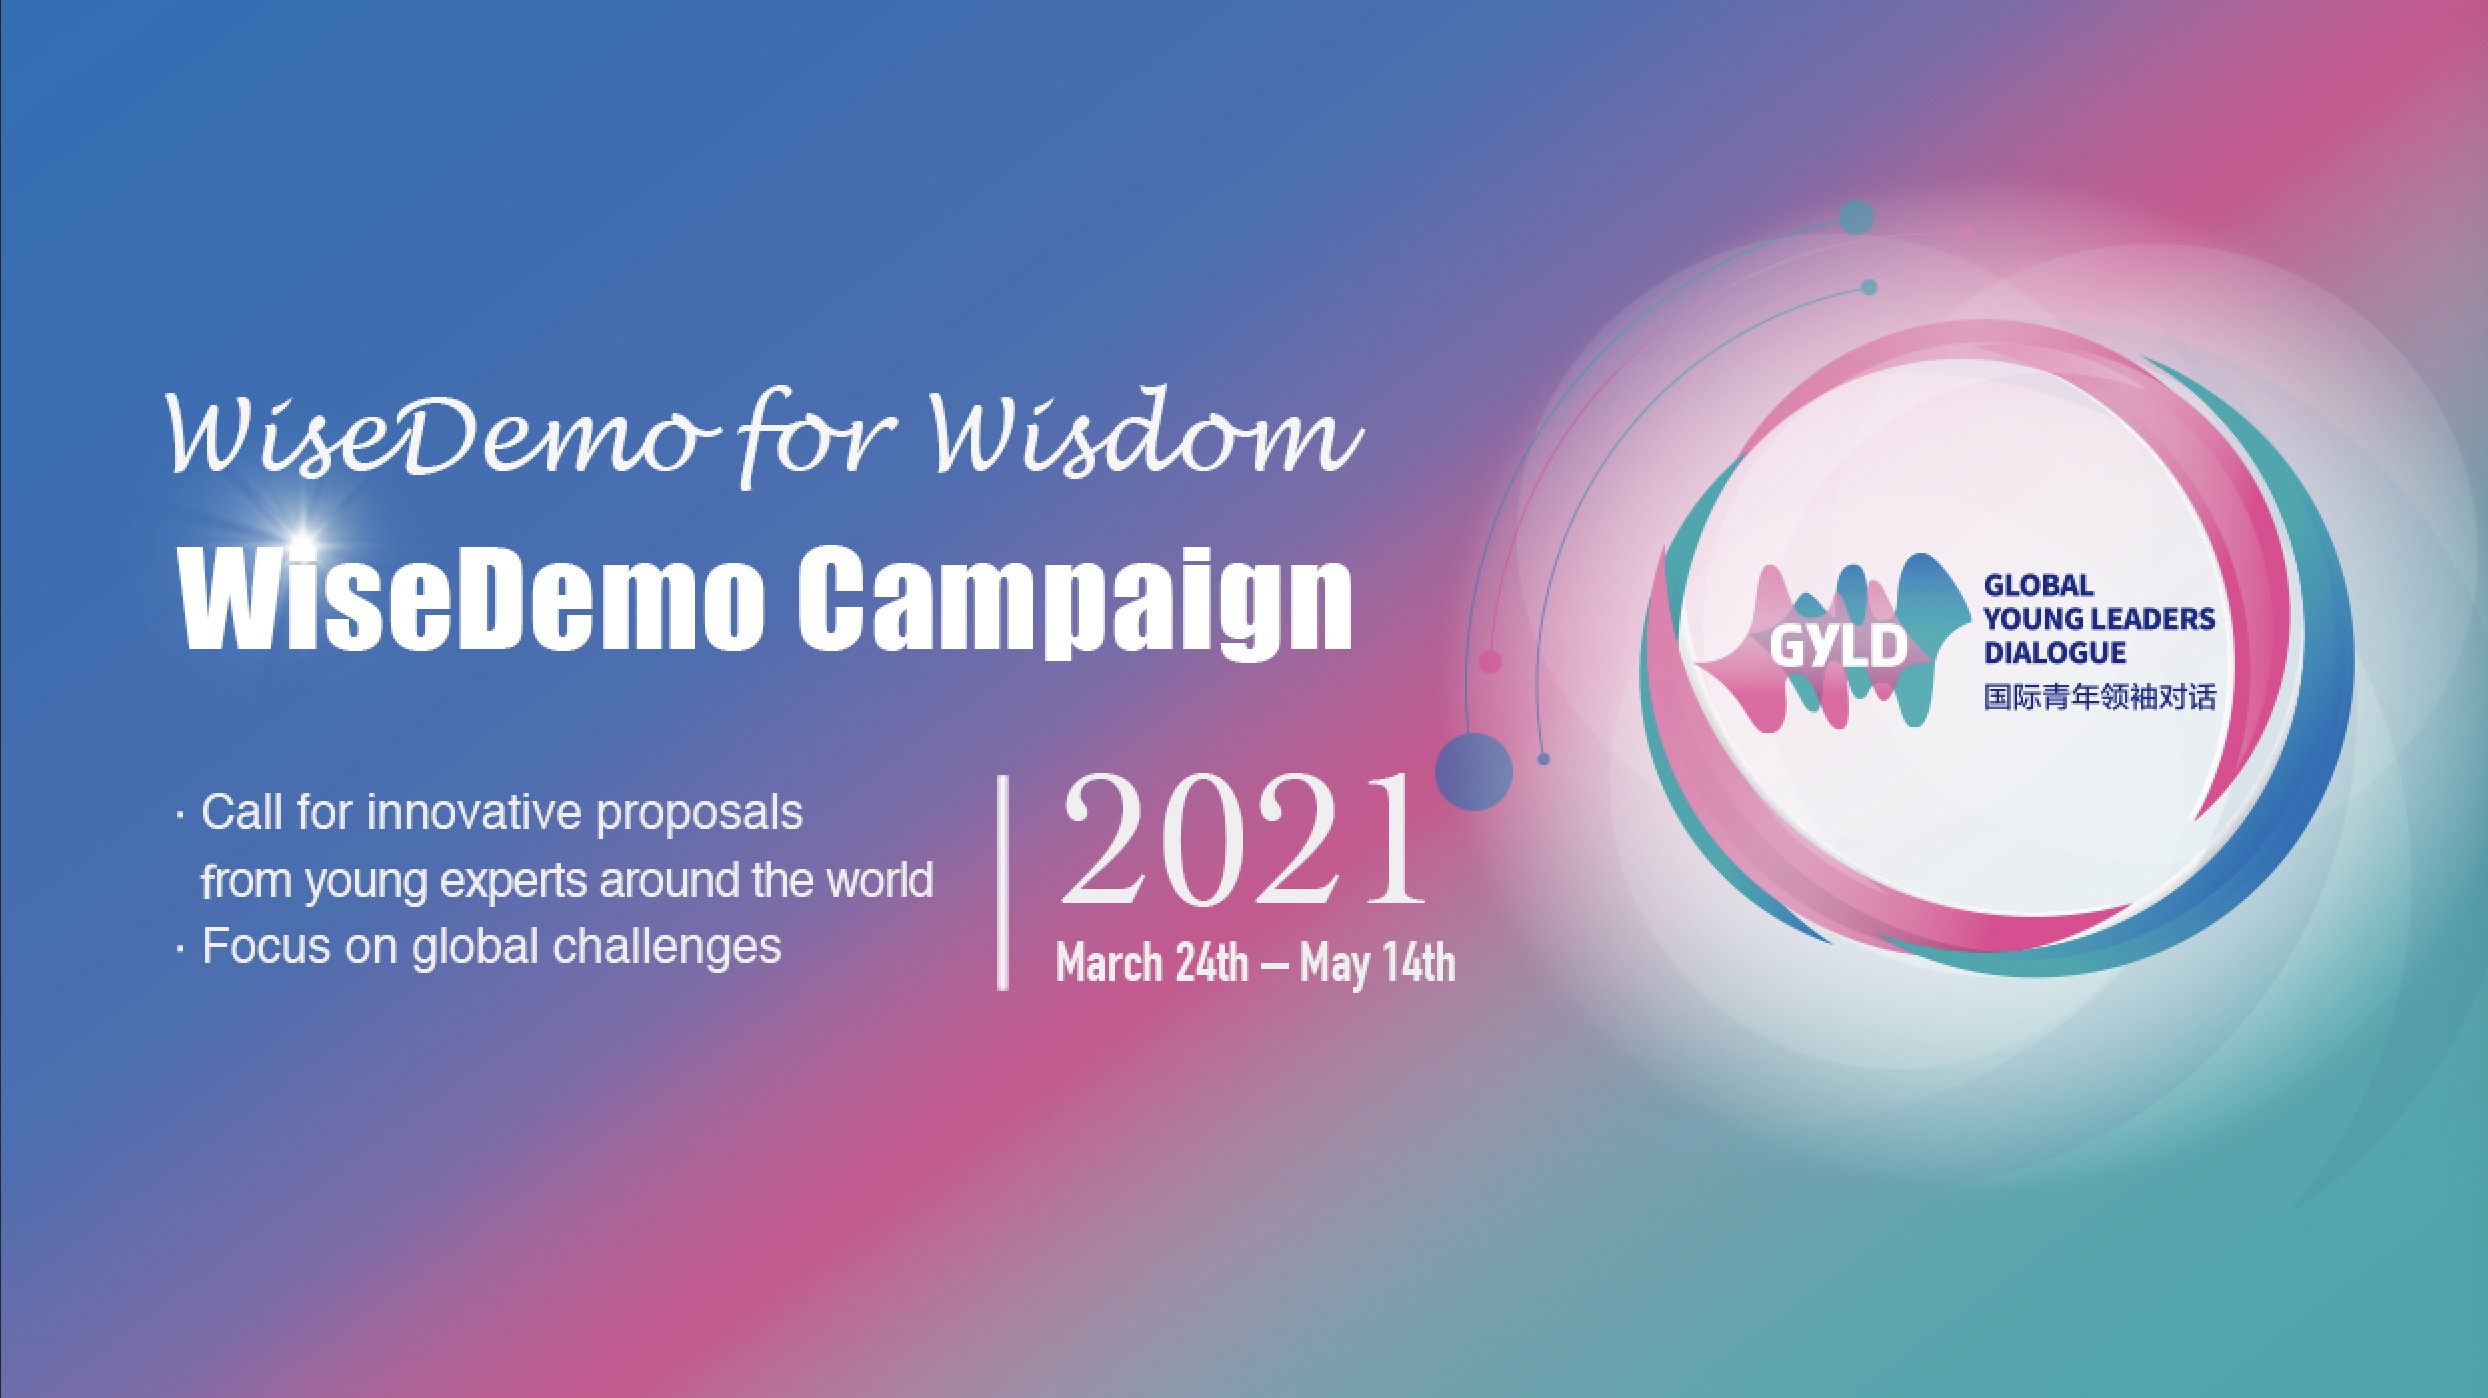 WiseDemo Campaign Launched – Calling for Innovative Proposals from Global Young Experts